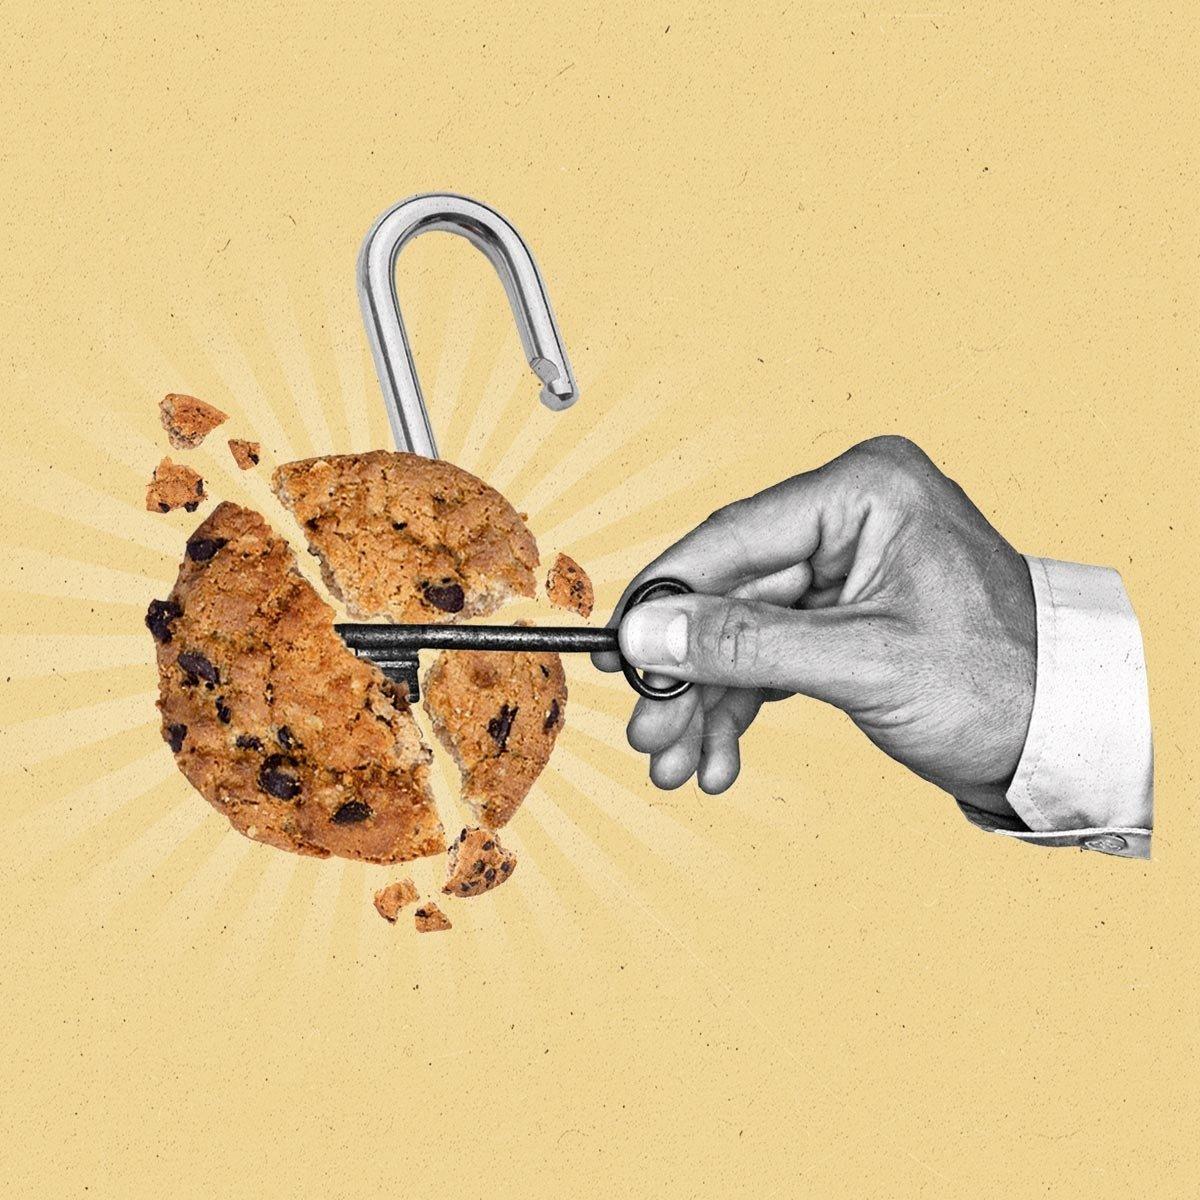 A hand uses a key to unlock a crumbling cookie.